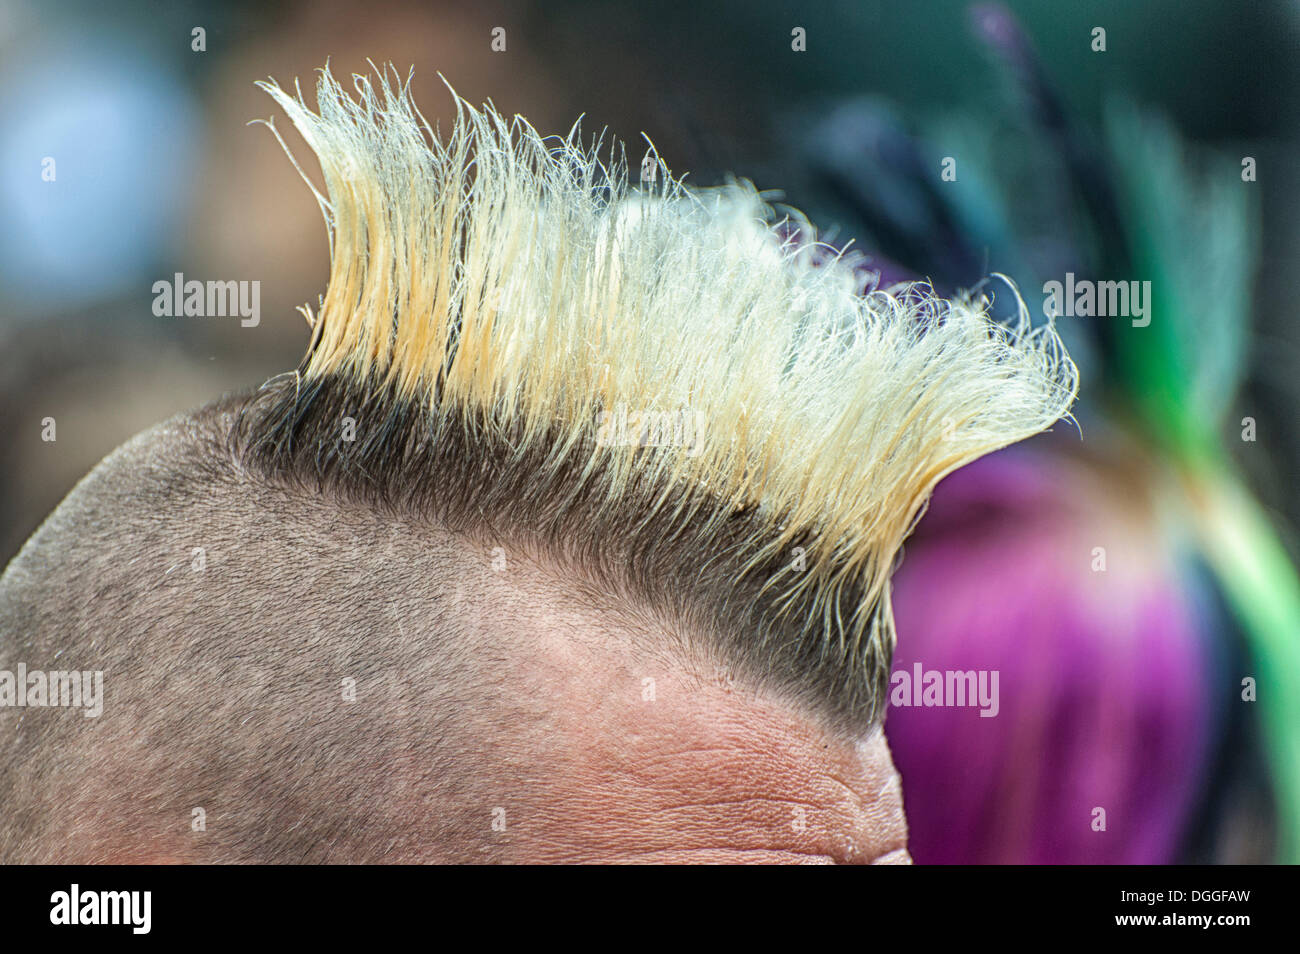 Upper half of the head of a man with a Mohawk haircut, Cologne, North Rhine-Westphalia Stock Photo